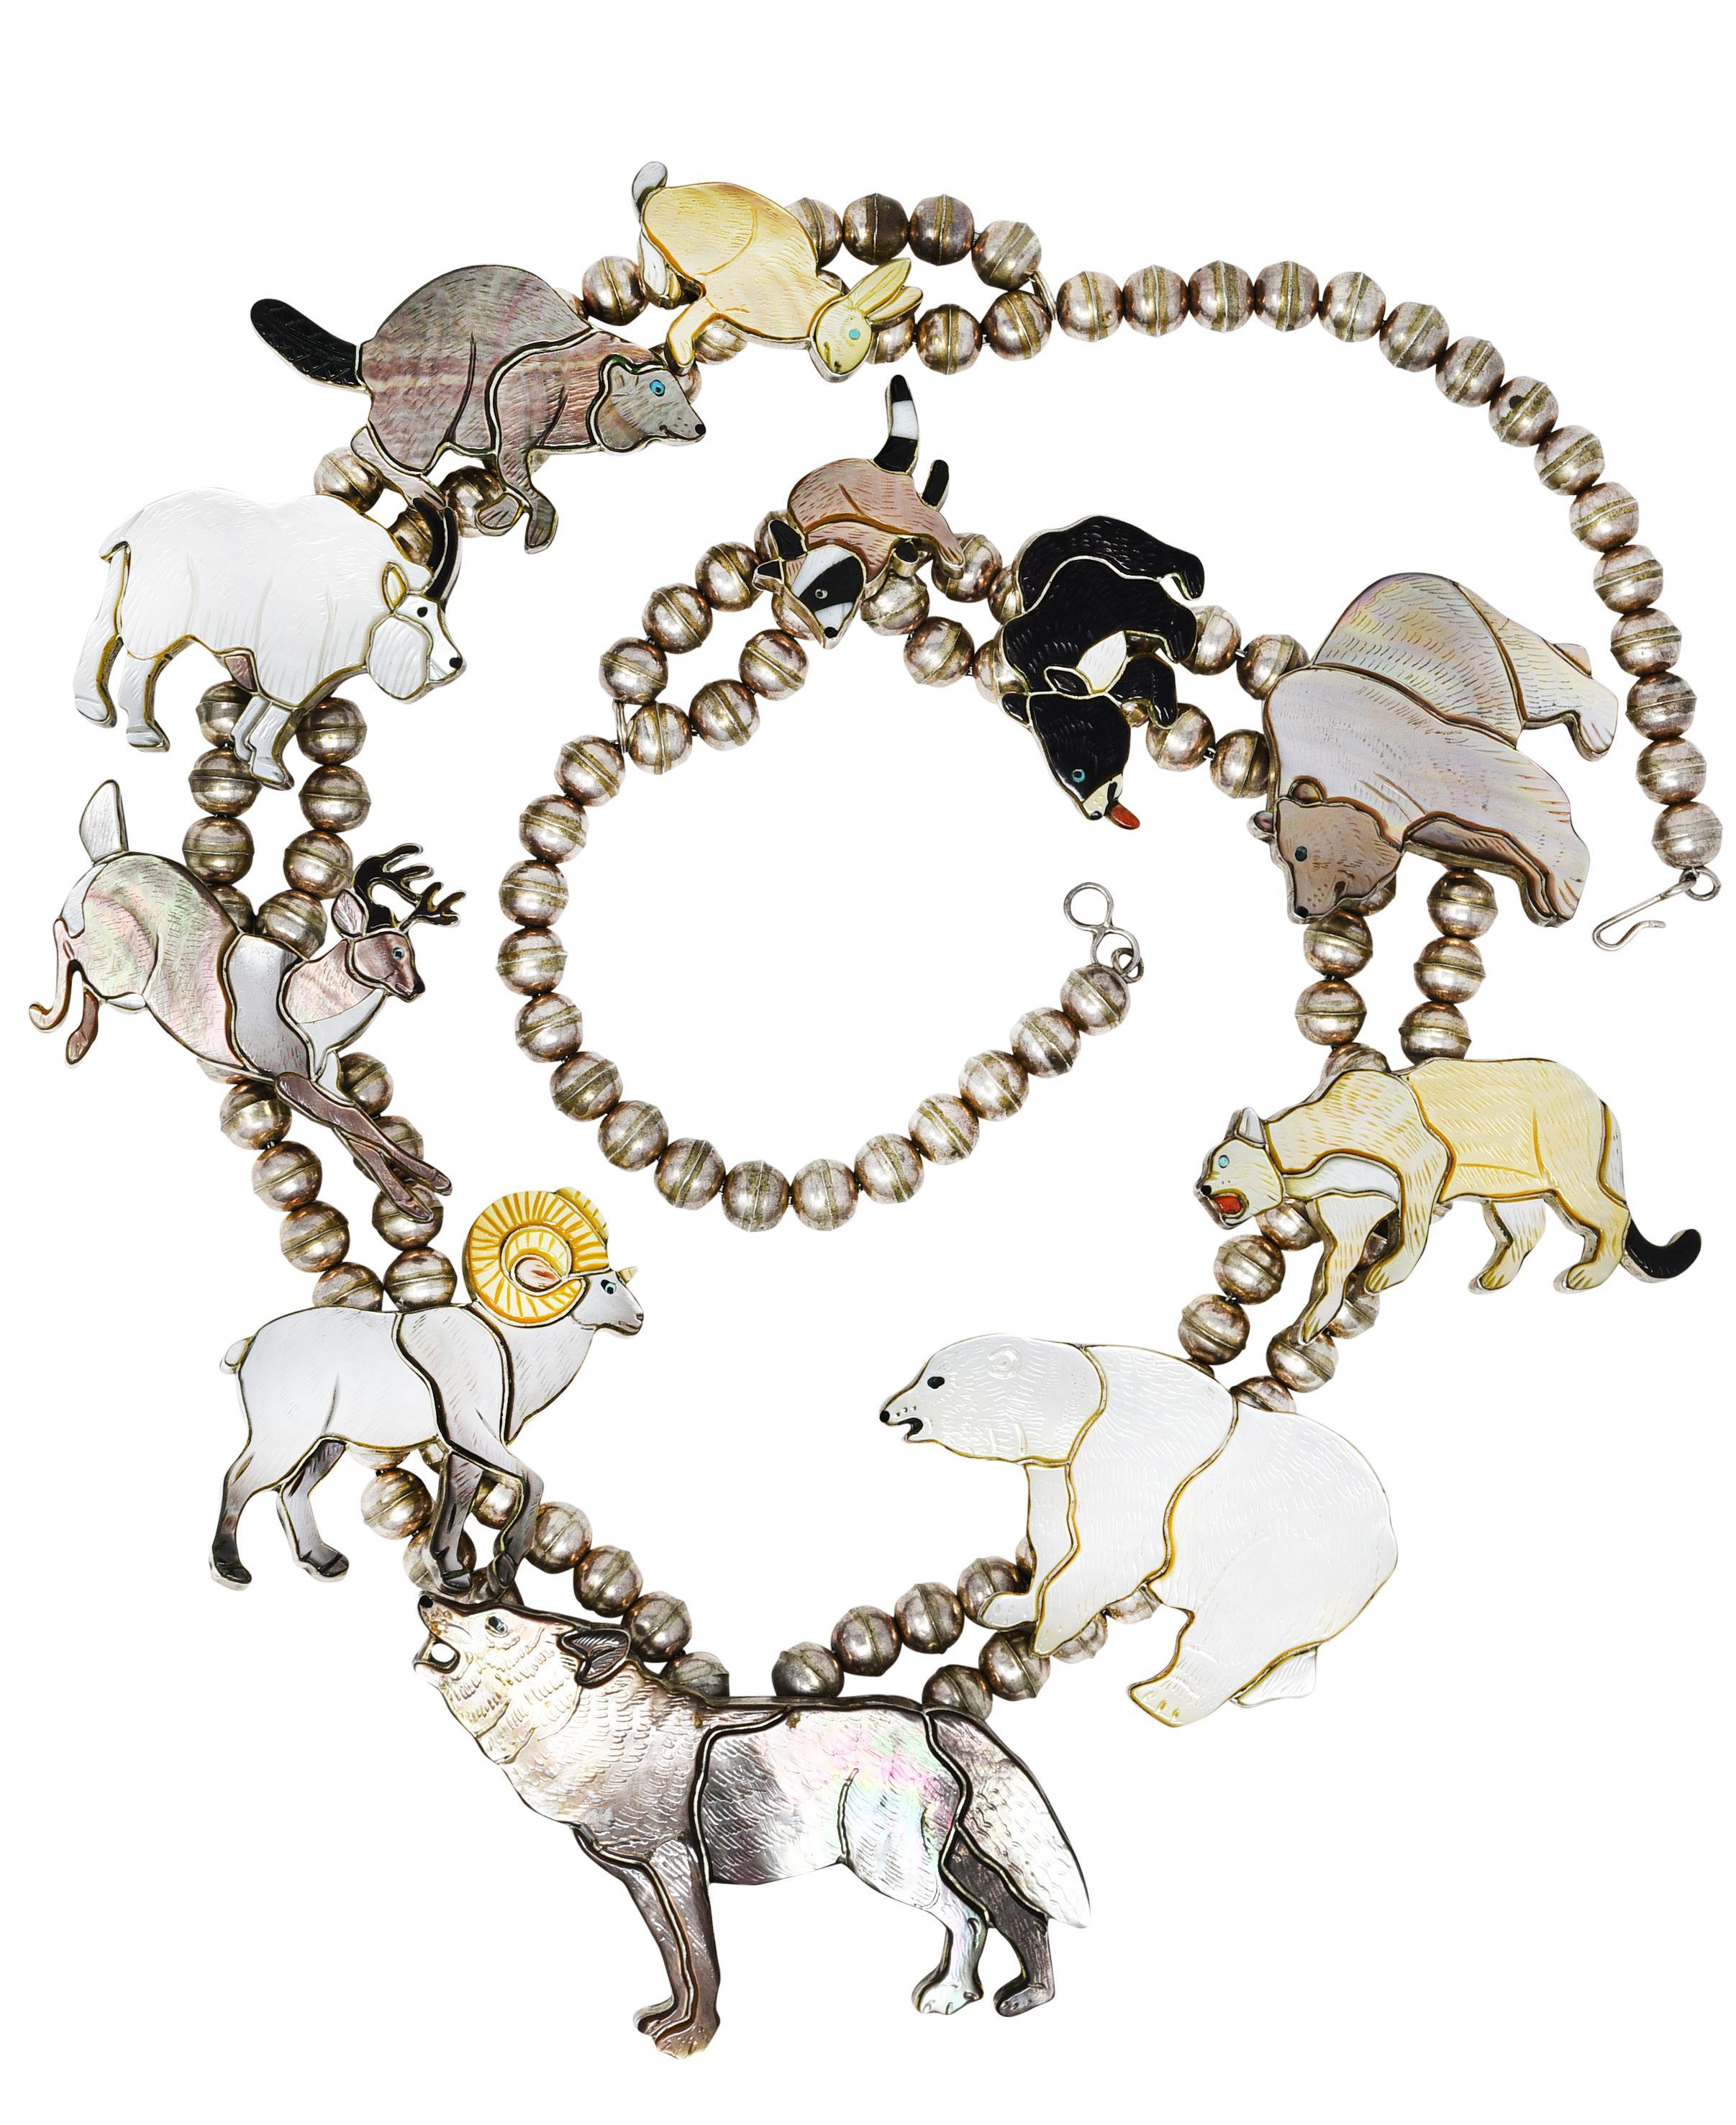 Necklace is designed as strands of round silver beads with large inlaid mother-of-pearl and shell animal stations
Engraved to depict a rabbit, beaver, goat, deer, ram, wolf, polar bear, cougar, brown bear, sun bear and racoon 
Mother-of-pearl and